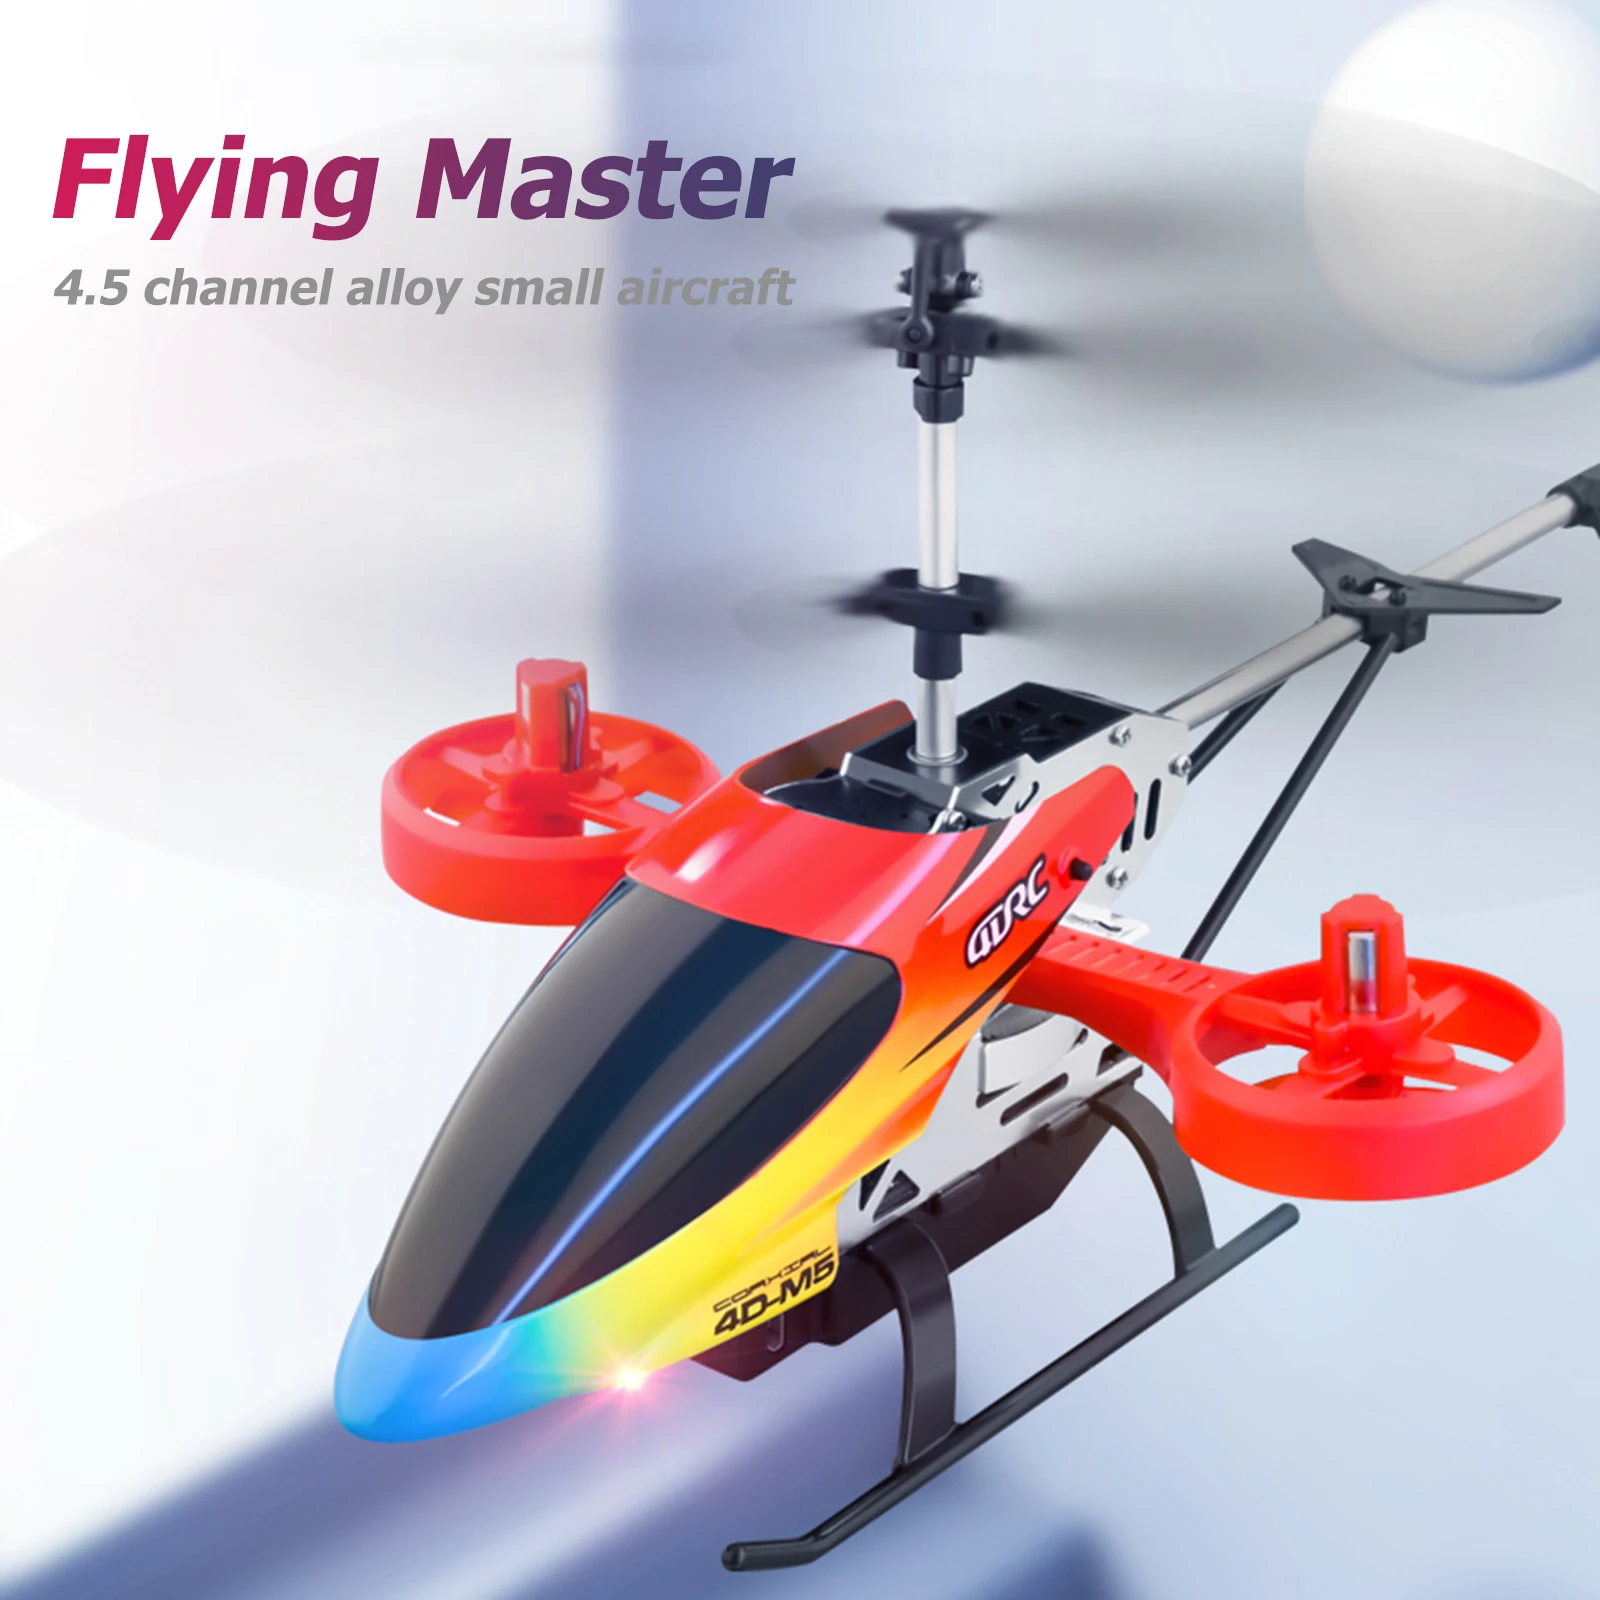 

RC Helicopter Airplane 2.4GHz Remote Control Helicopter 4.5 Channel Altitude Hold RC Helicopters with Gyro for Adult Kids gift